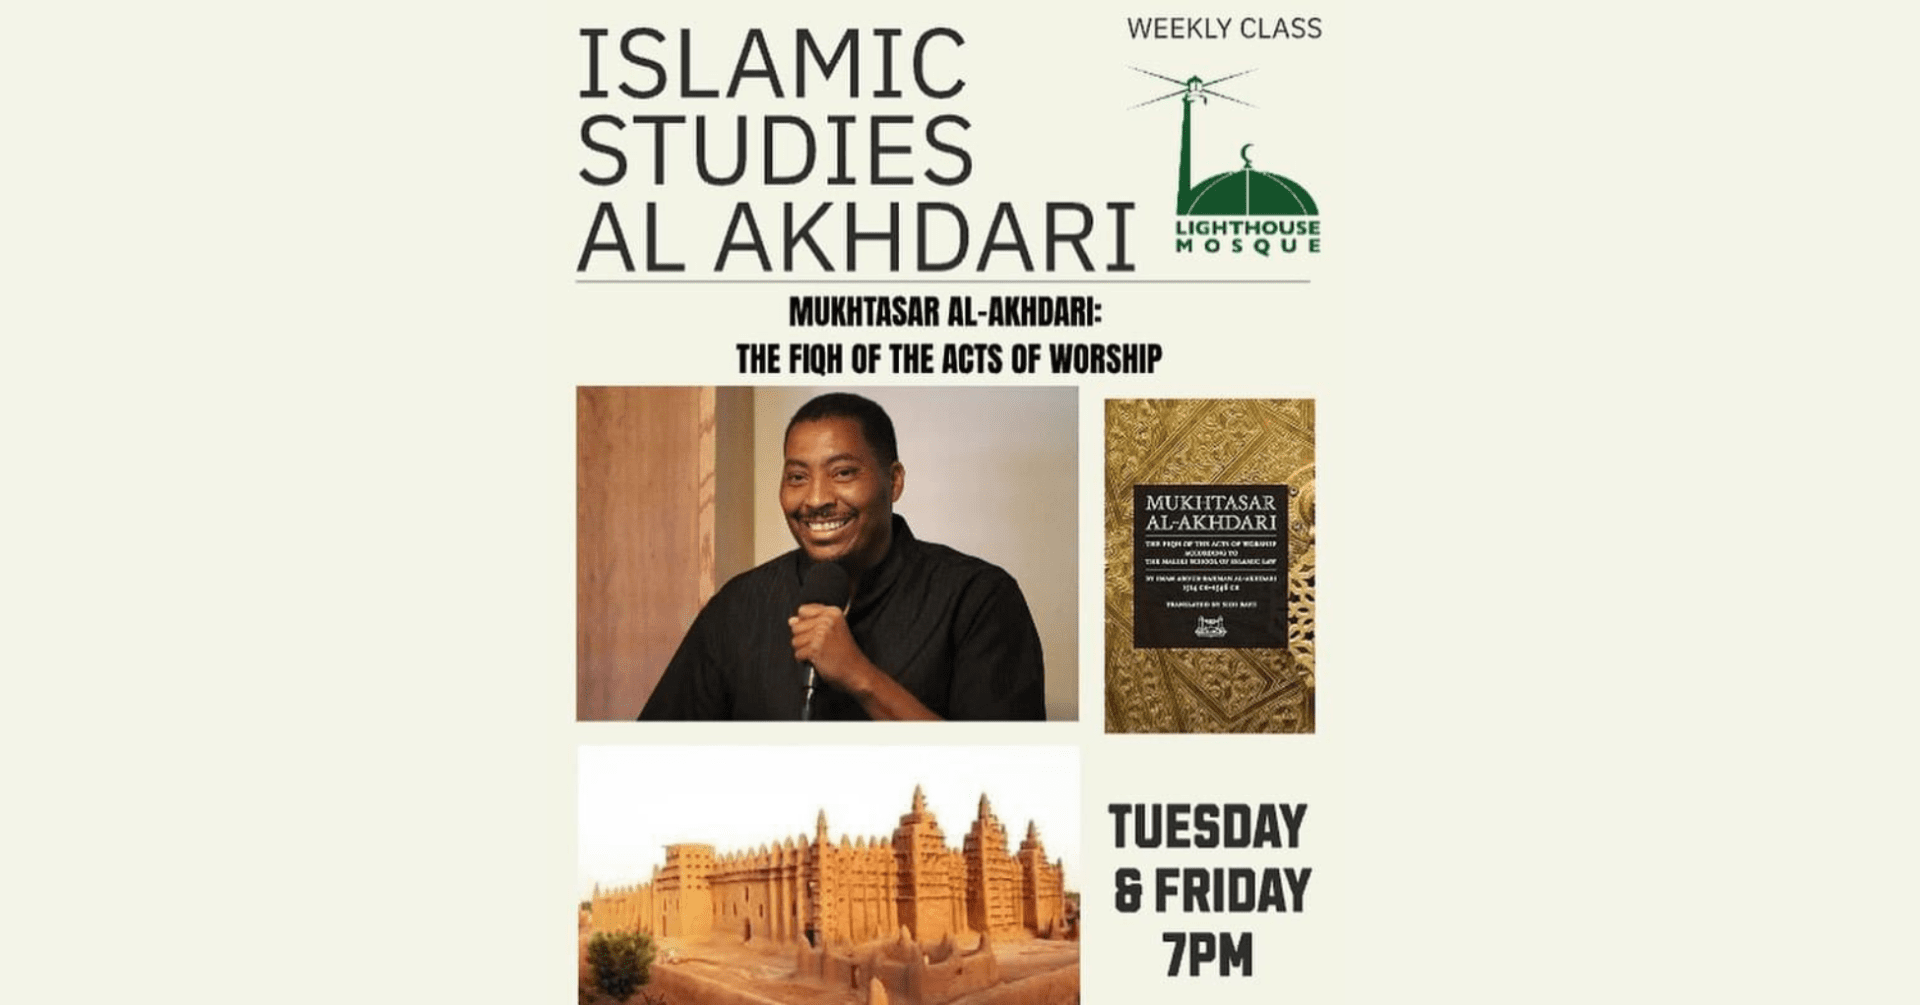 ISLAMIC STUDIES Tuesday & Friday 6 pm to 7 pm